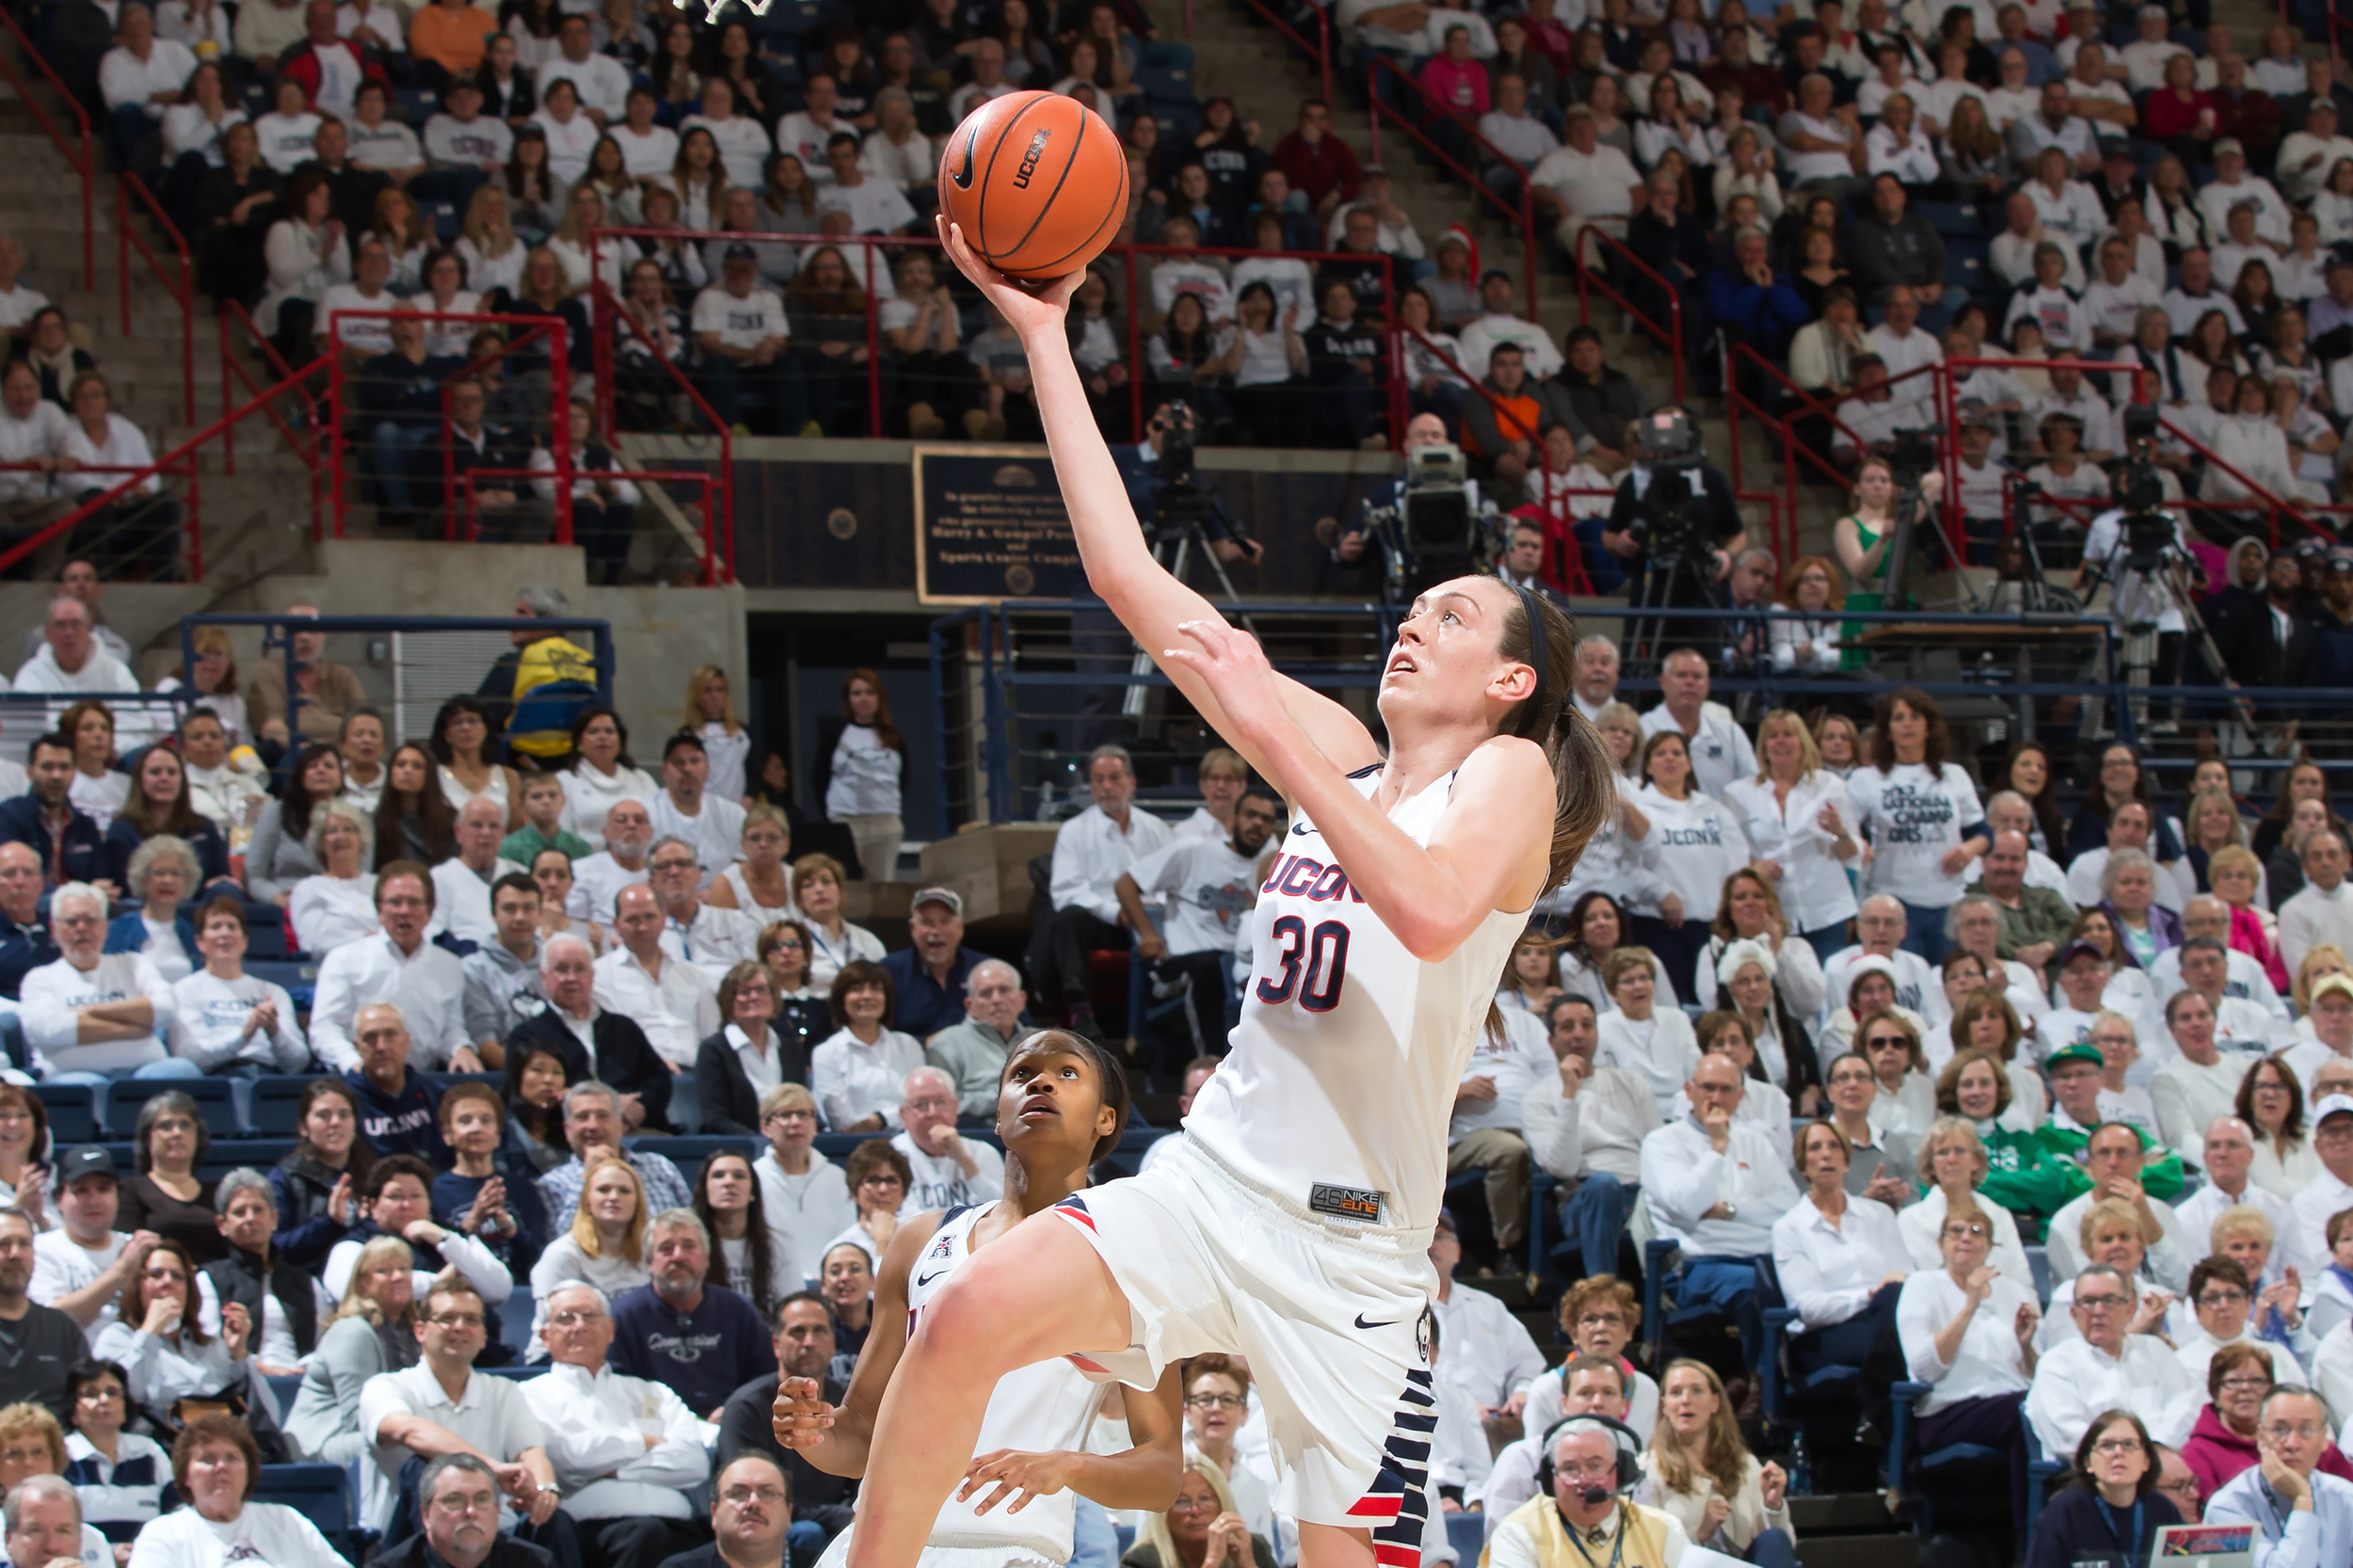 Breanna Stewart '16 (CLAS) is the only collegiate athlete among 25 finalists for the 2016 U.S. Olympic Women's Basketball Team. (Stephen Slade '89 (SFA) for UConn)